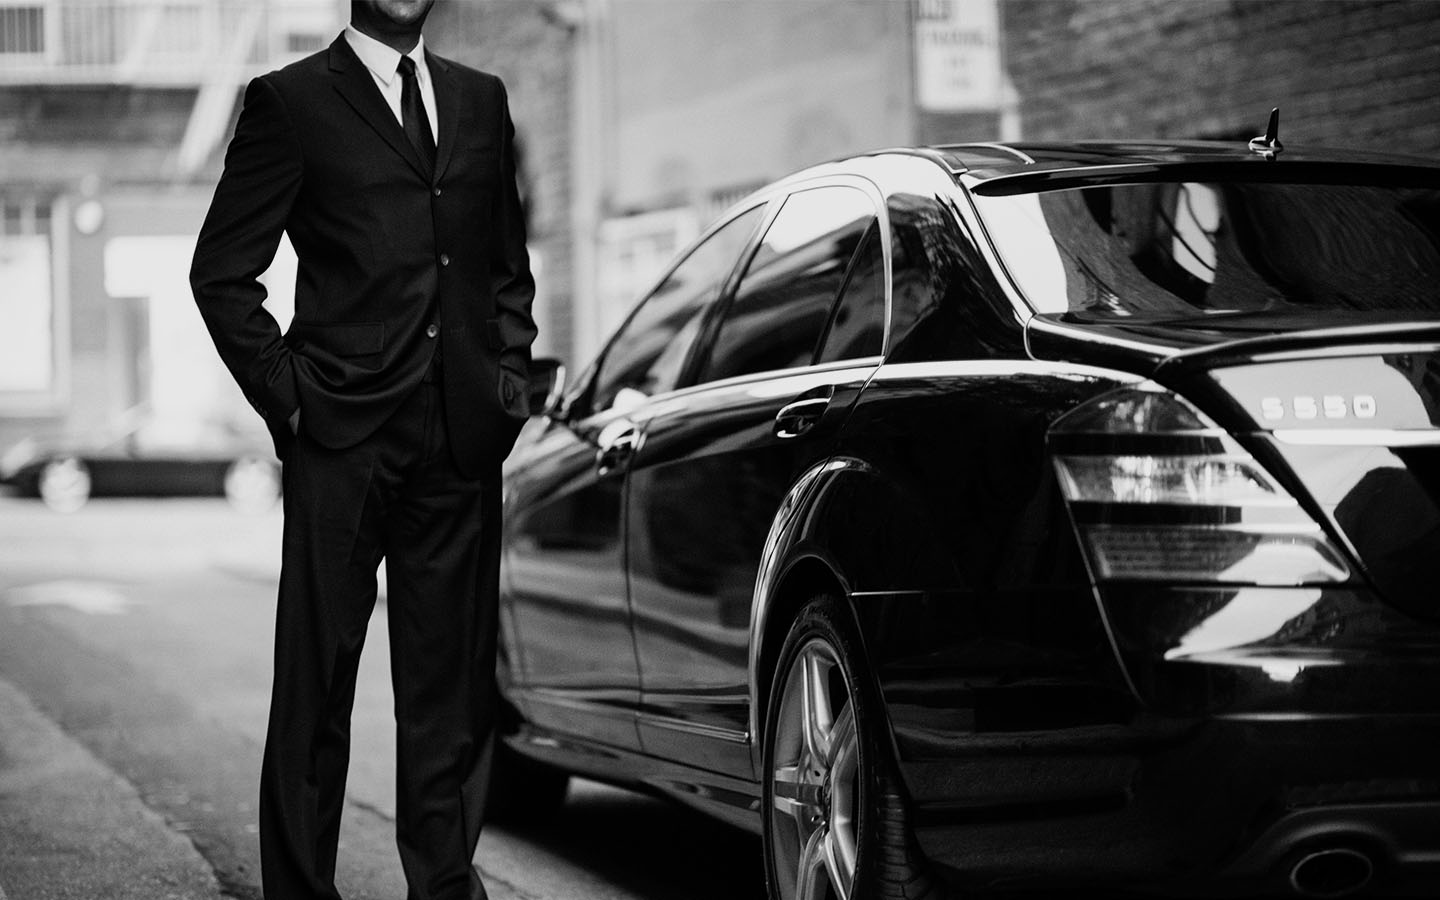 a man in a suit and tie standing next to a car